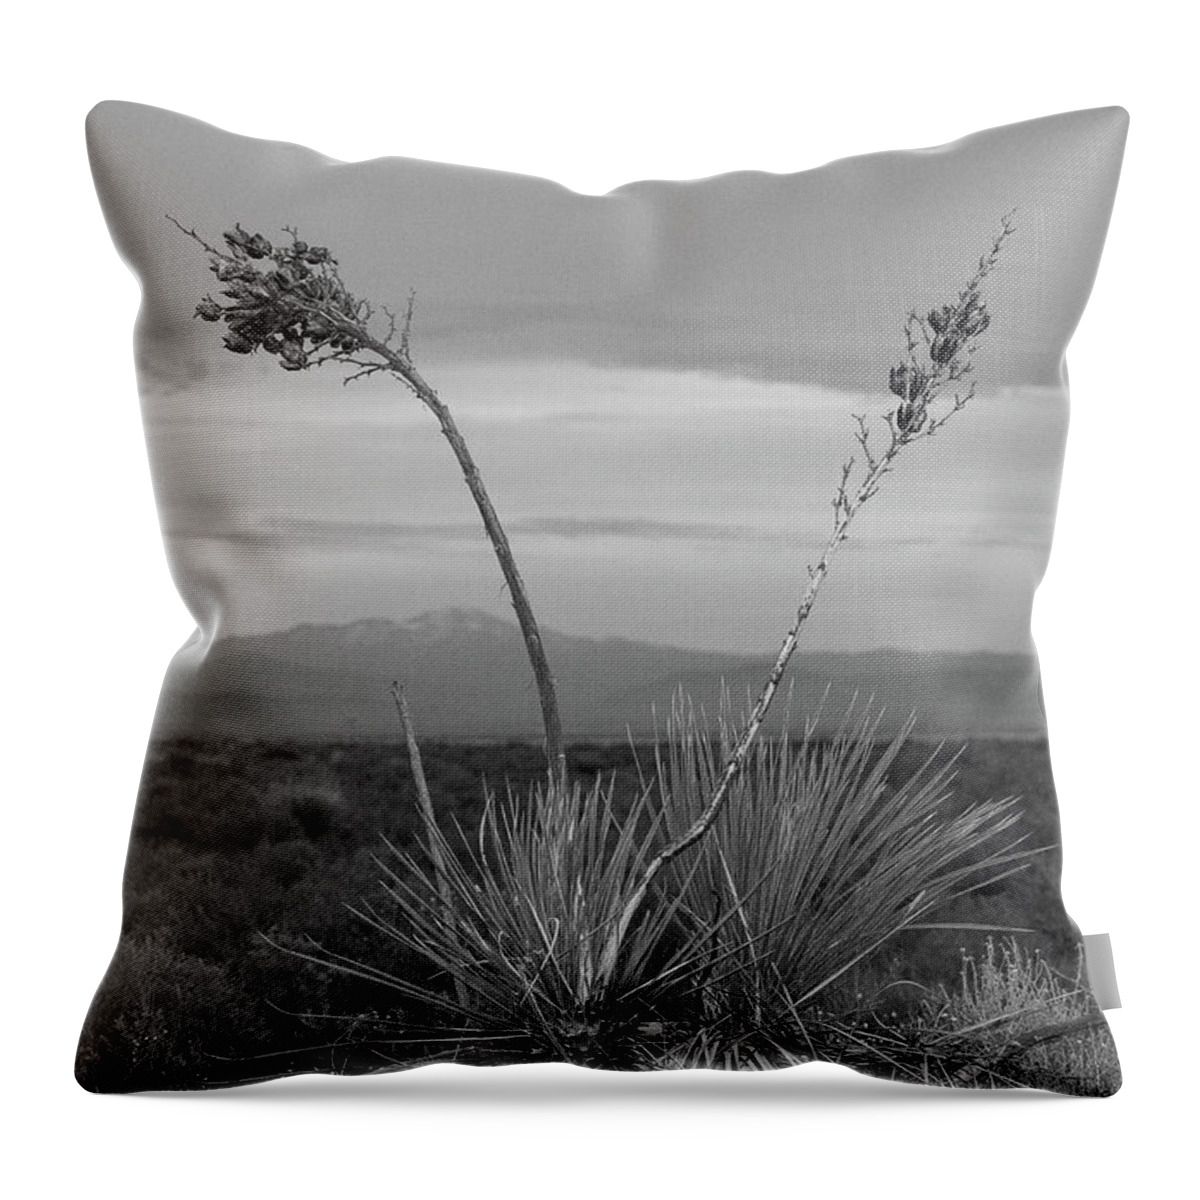 White Sands National Park Throw Pillow featuring the photograph Winter Yucca by Amanda Rimmer